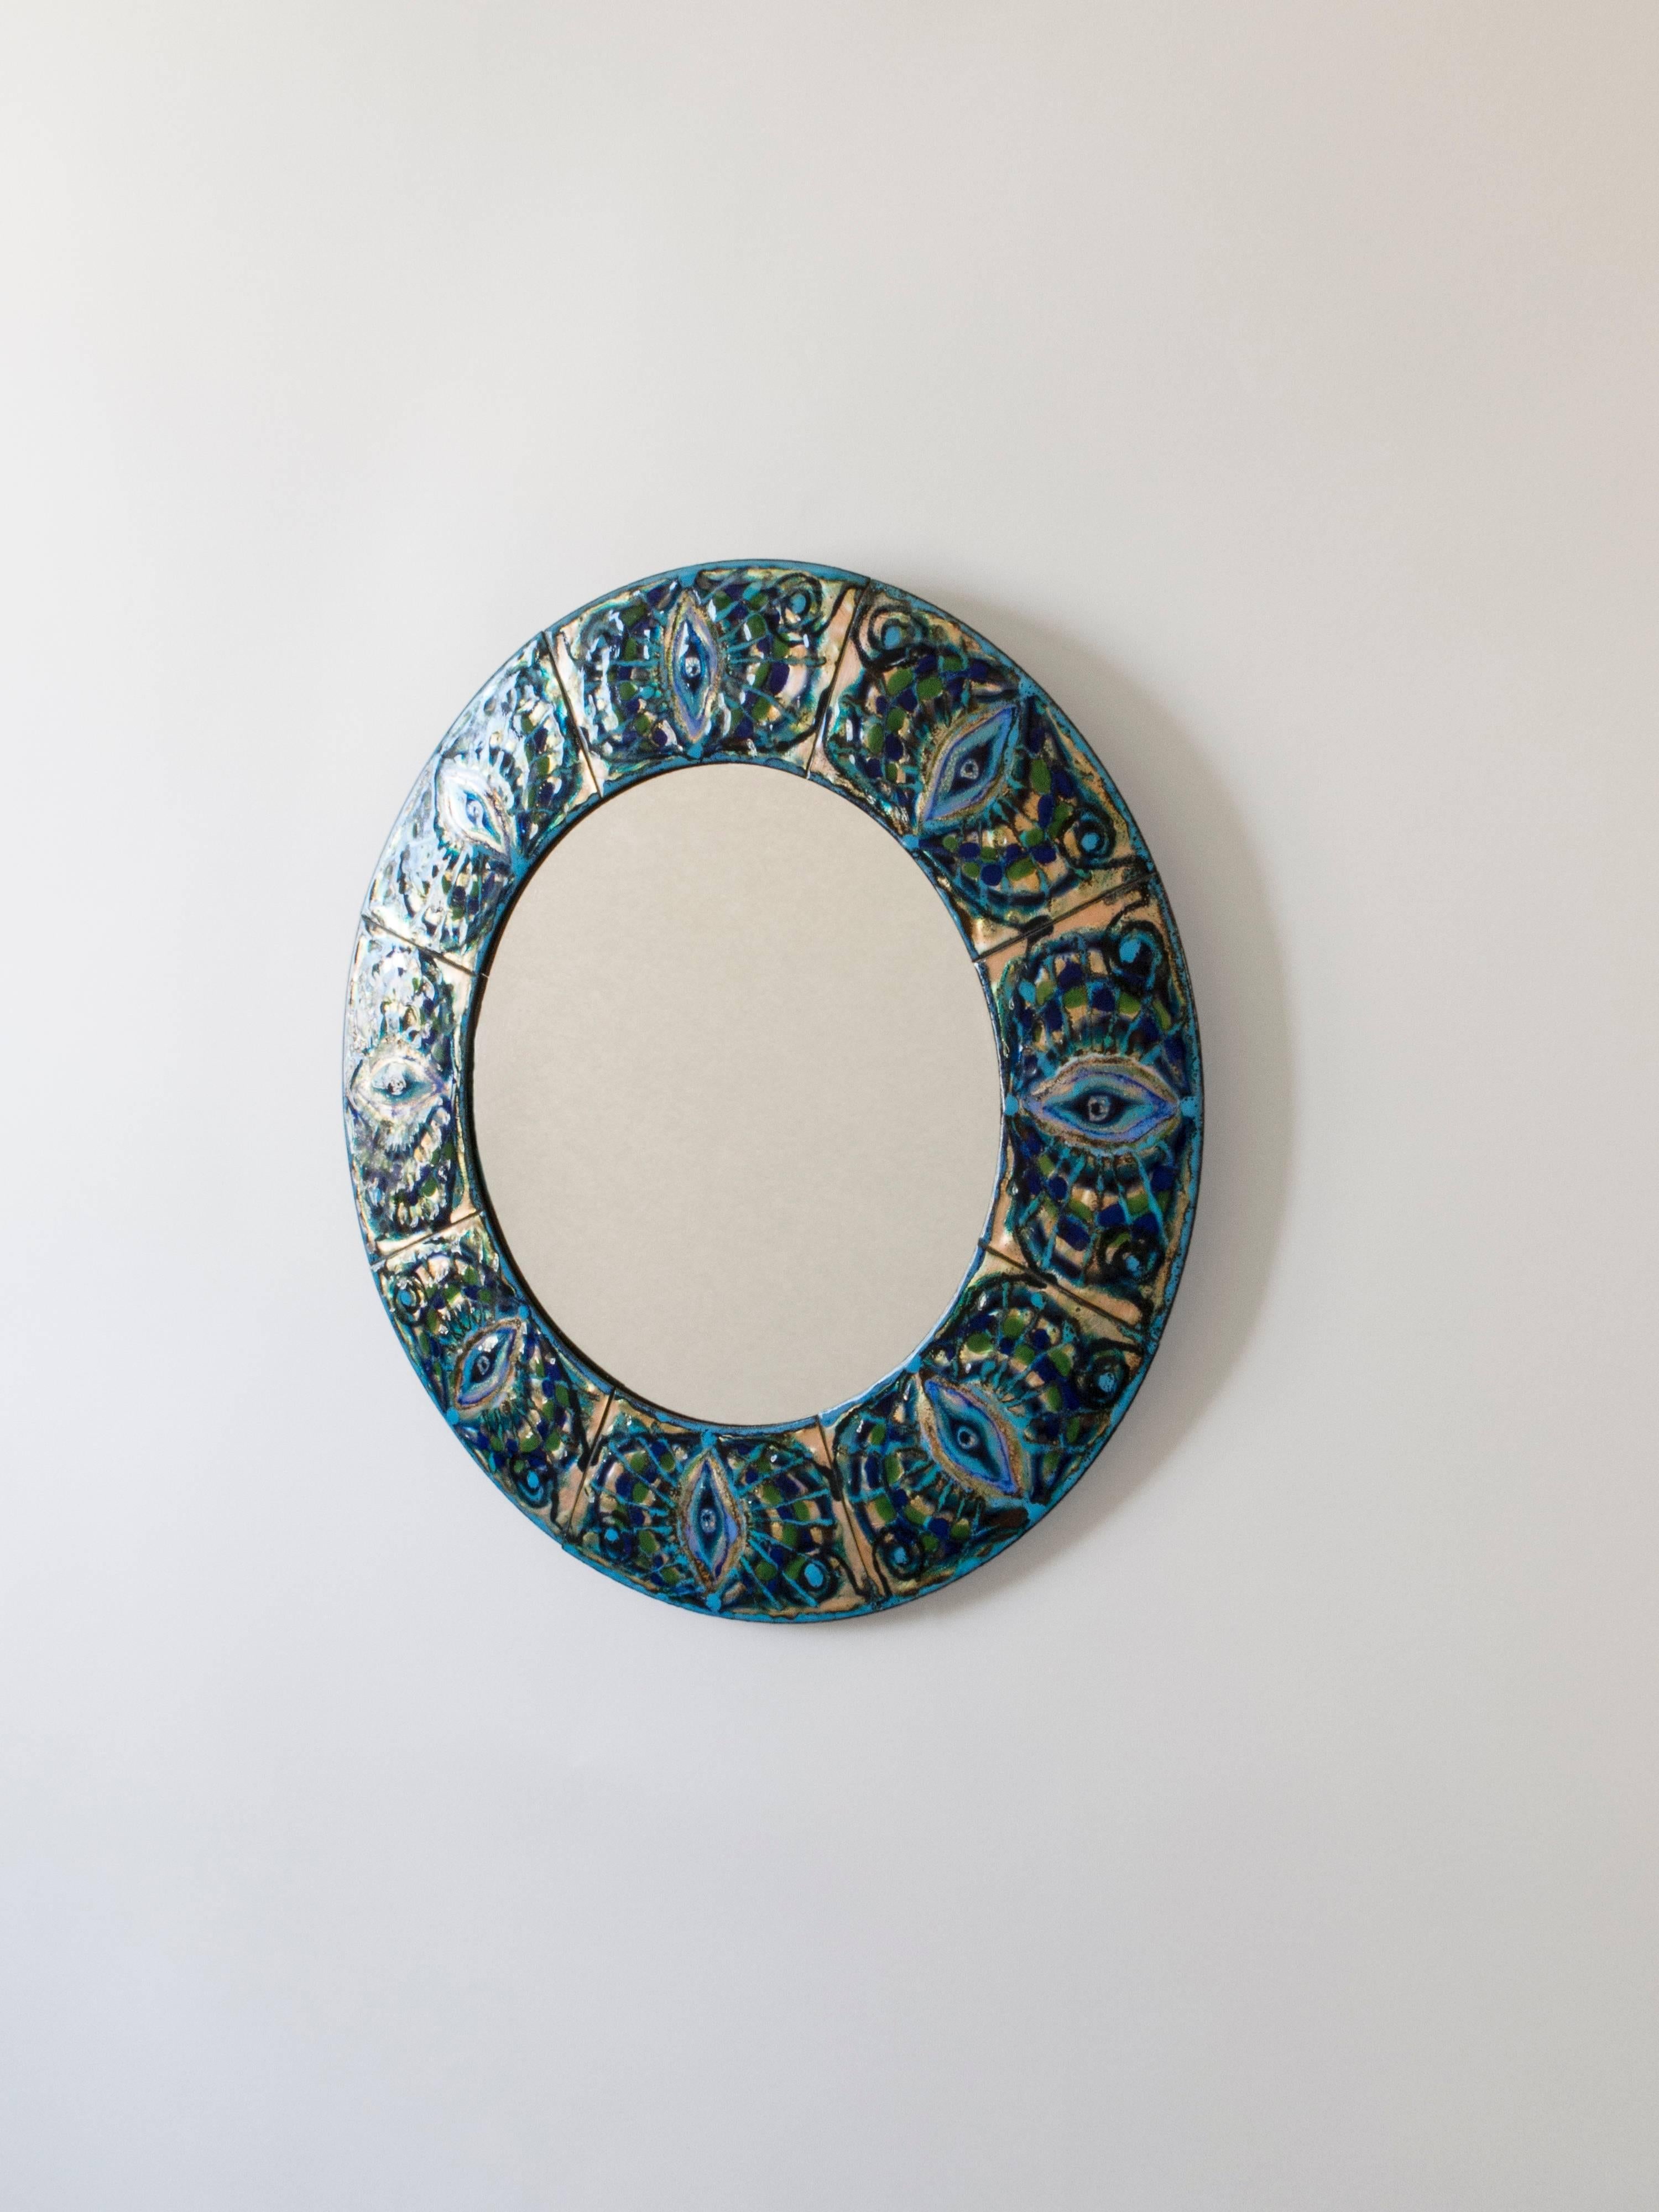 Composed of enameled copper plates hand-painted by the Danish artist Bodil Eje. The repeating pattern displays vivid turquoise, cobalt, green and colorless enamel, surrounding a colorless glass mirror plate. 

A vivid little jewel in great